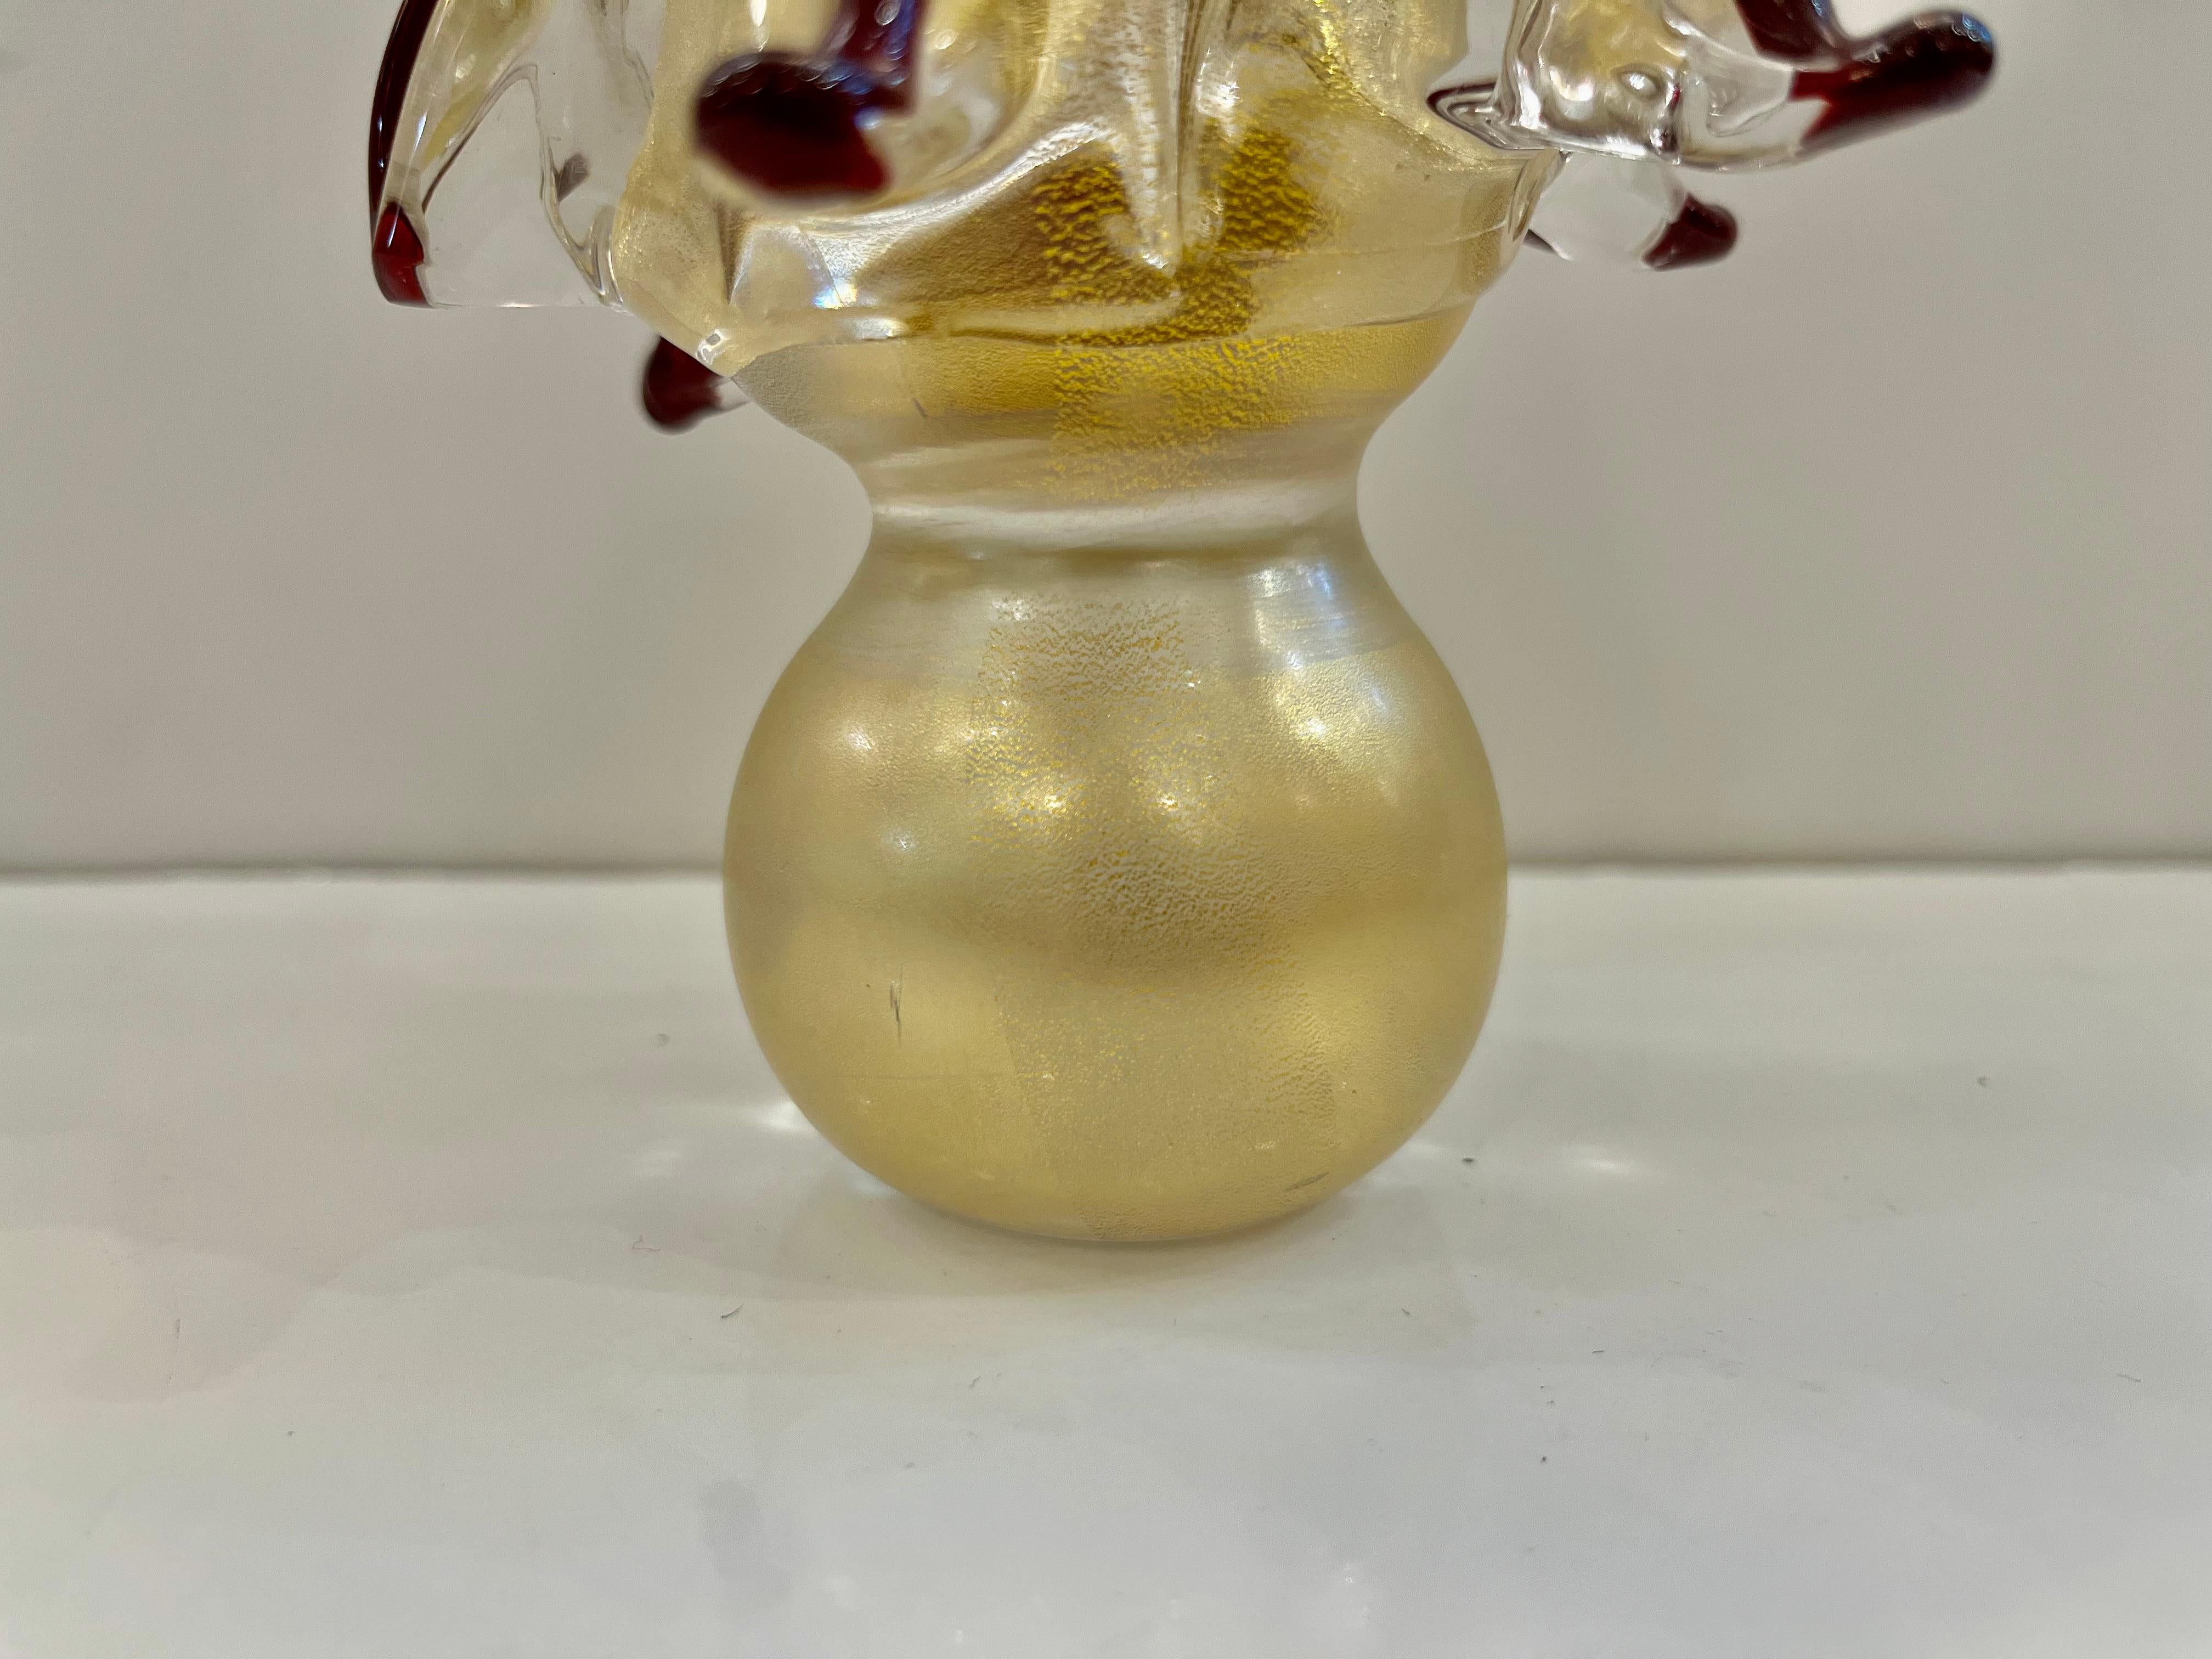 Murano glass trees of organic sleek modern design, a vintage creation by the Venetian company Formia, signed pieces, individually mouth blown and handcrafted. Made precious by the use of extensive pure 24-karat gold and handcrafted with twist in the